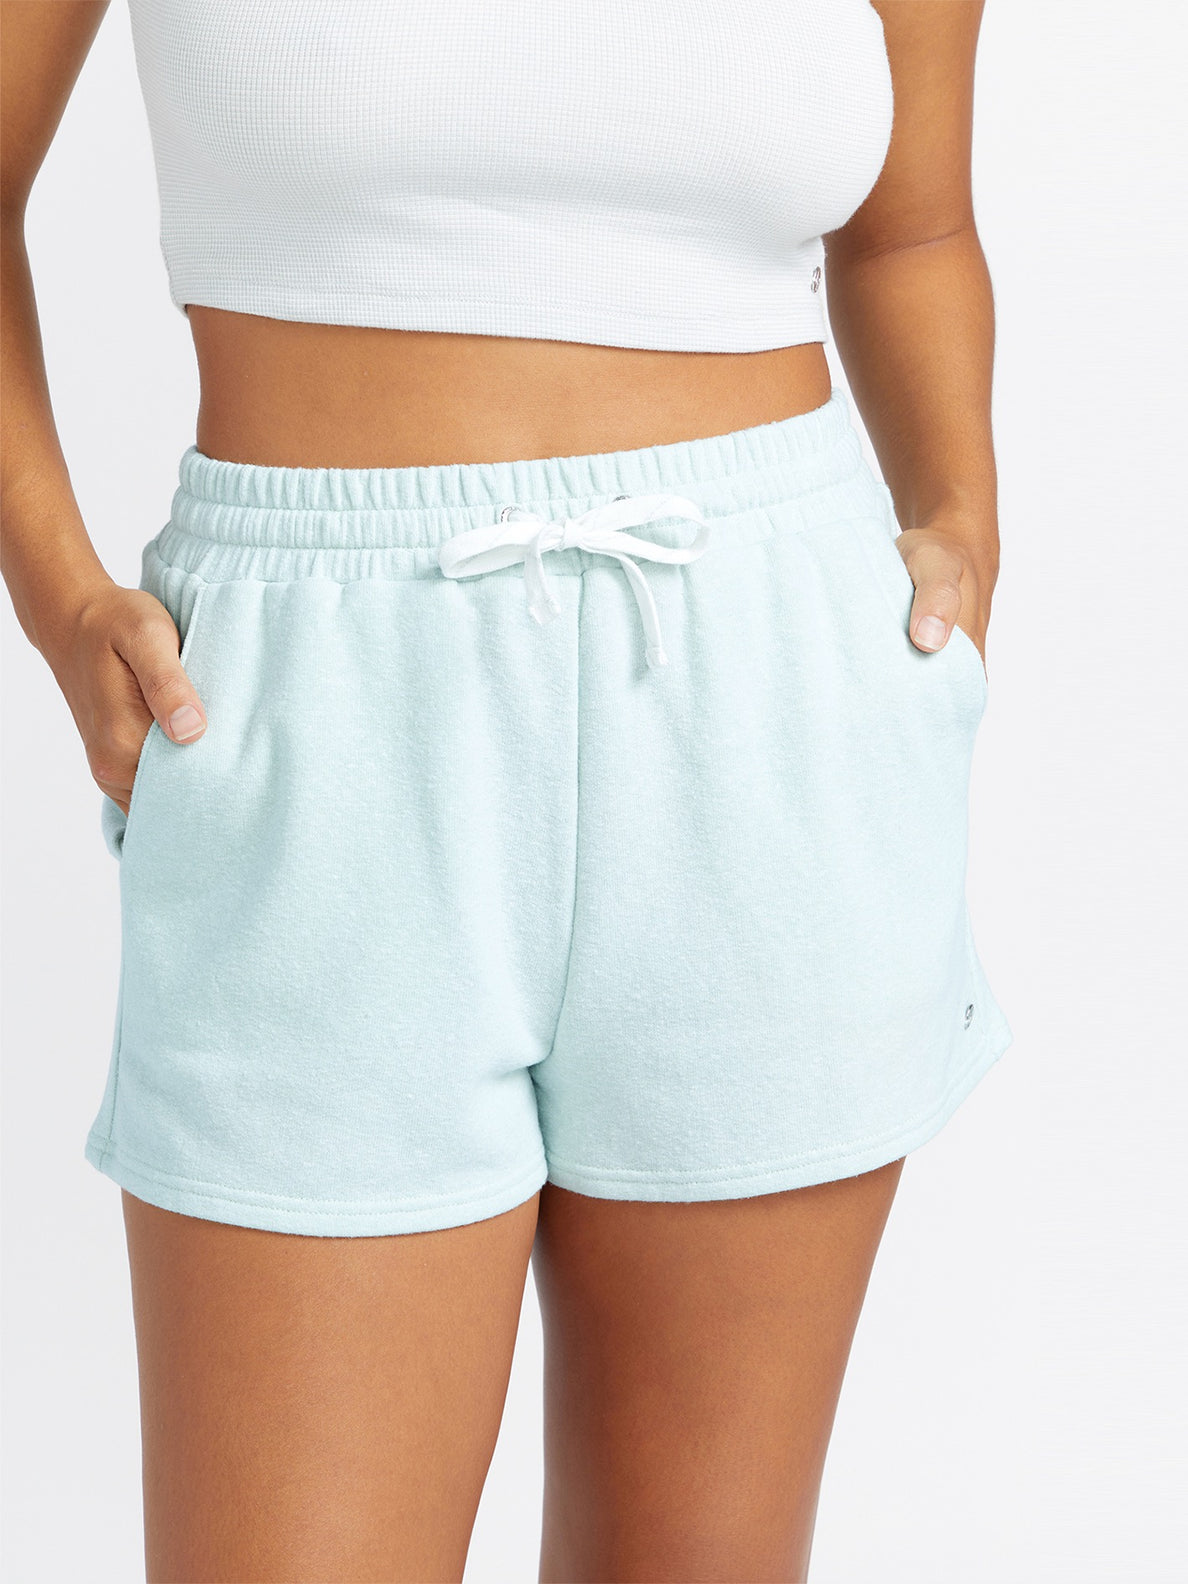 Lived in Lounge Frenchie Shorts - Chlorine